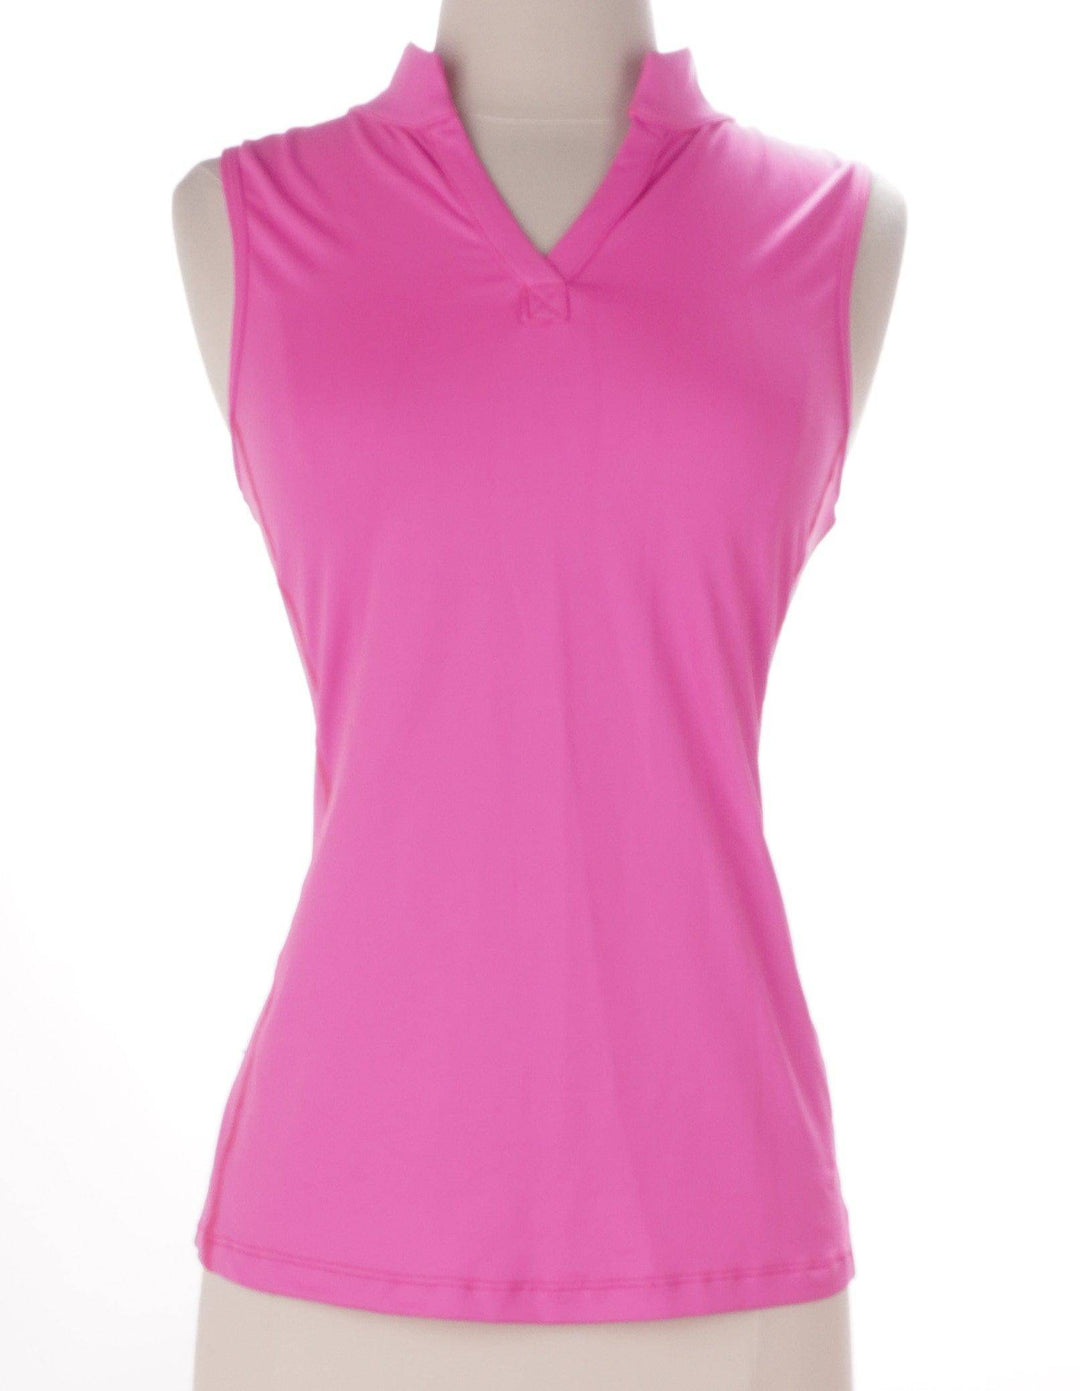 ES Pink / 2 / Consigned ES Sleeveless Top - Size 2